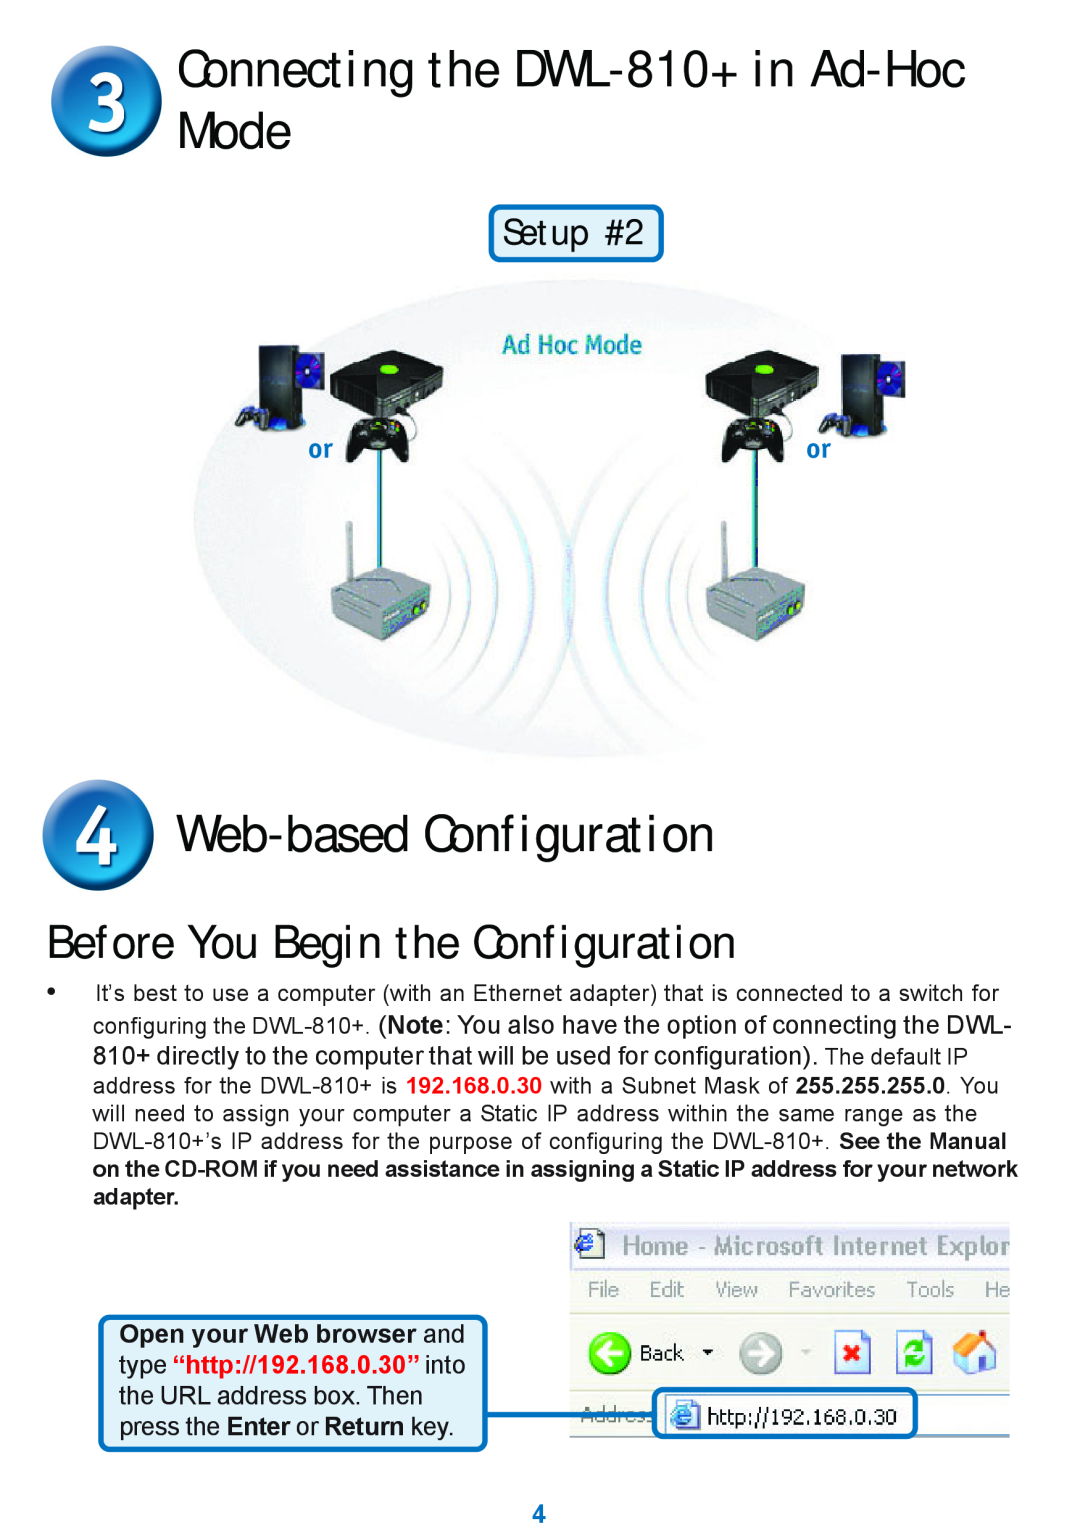 D-Link Connecting the DWL-810+ in Ad-Hoc Mode, Web-based Configuration, Setup #2, Before You Begin the Configuration 